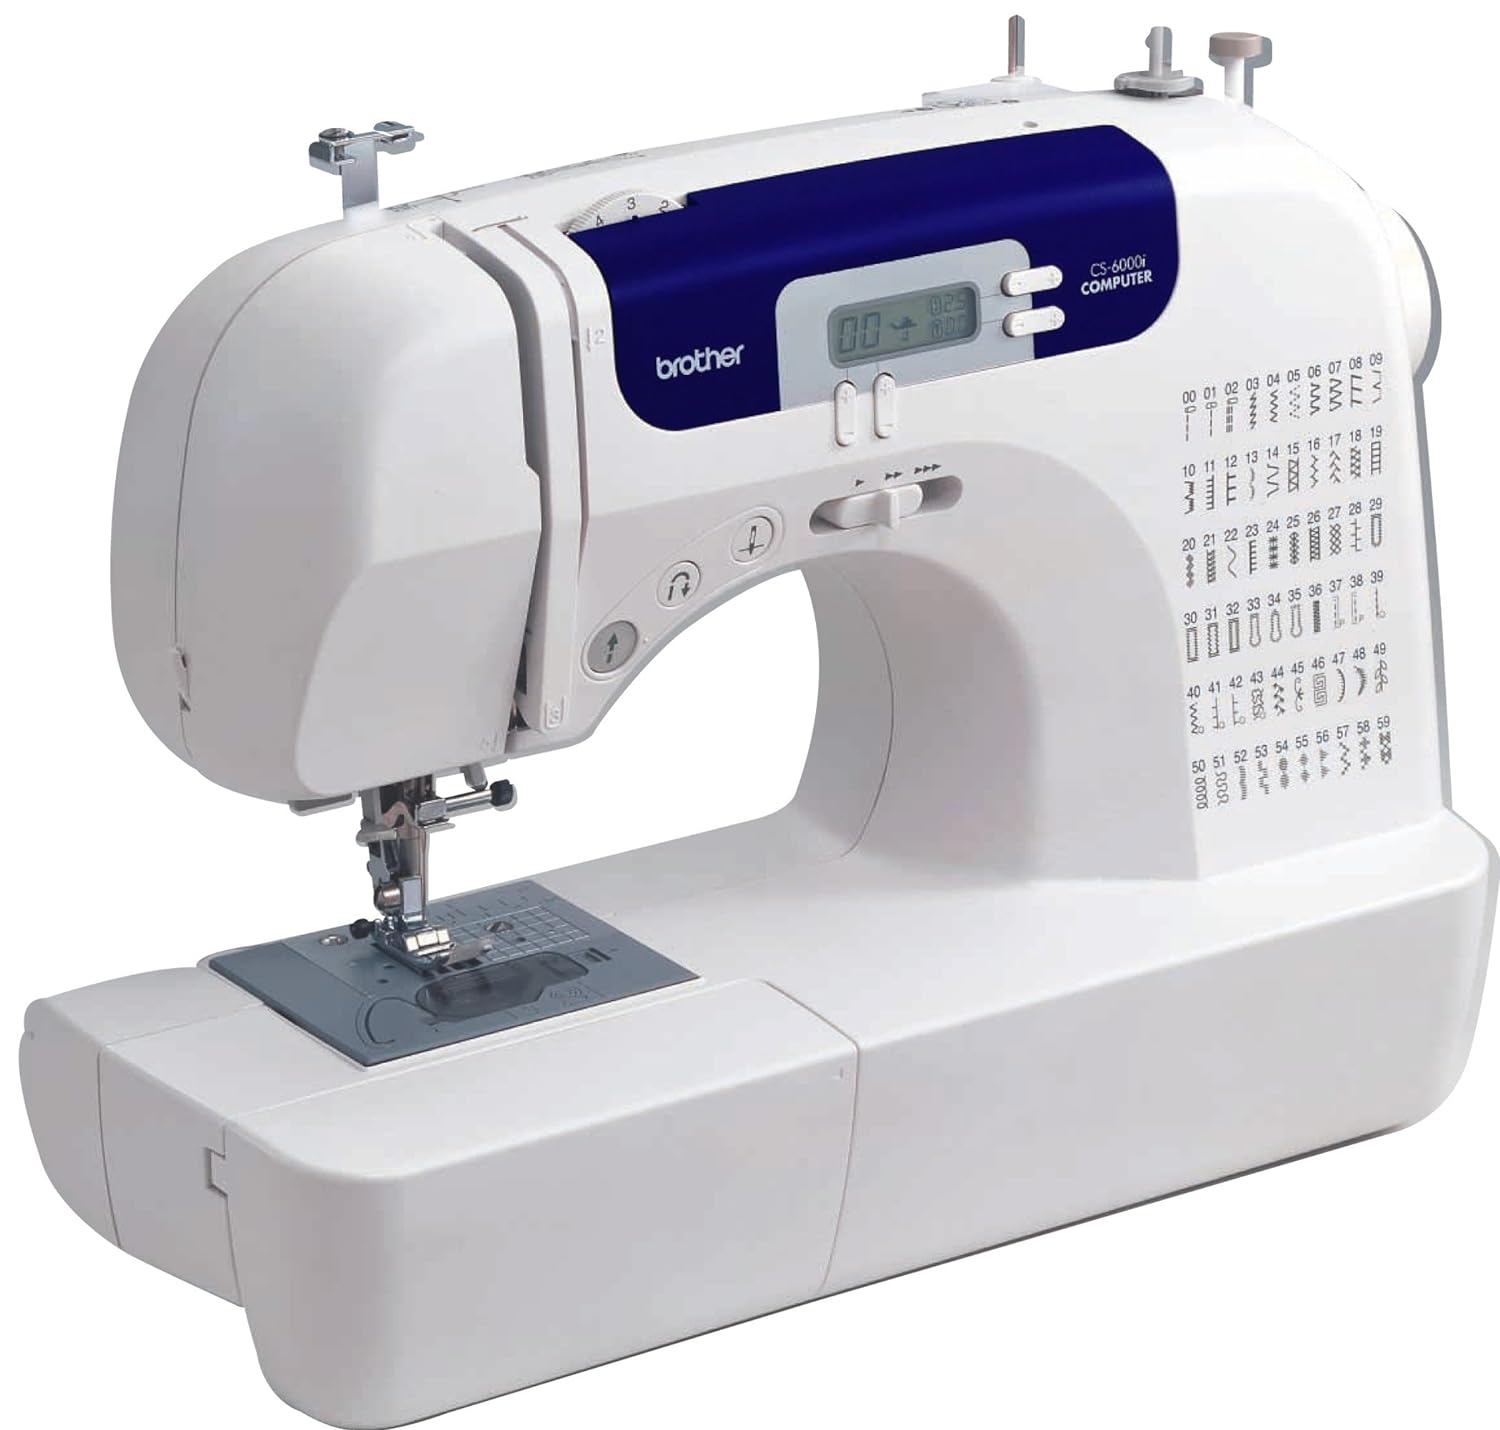 Brother CS6000i Feature-Rich Sewing Machine With 60 Built-In Stitches, 7 styles of 1-Step Auto-Size Buttonholes,